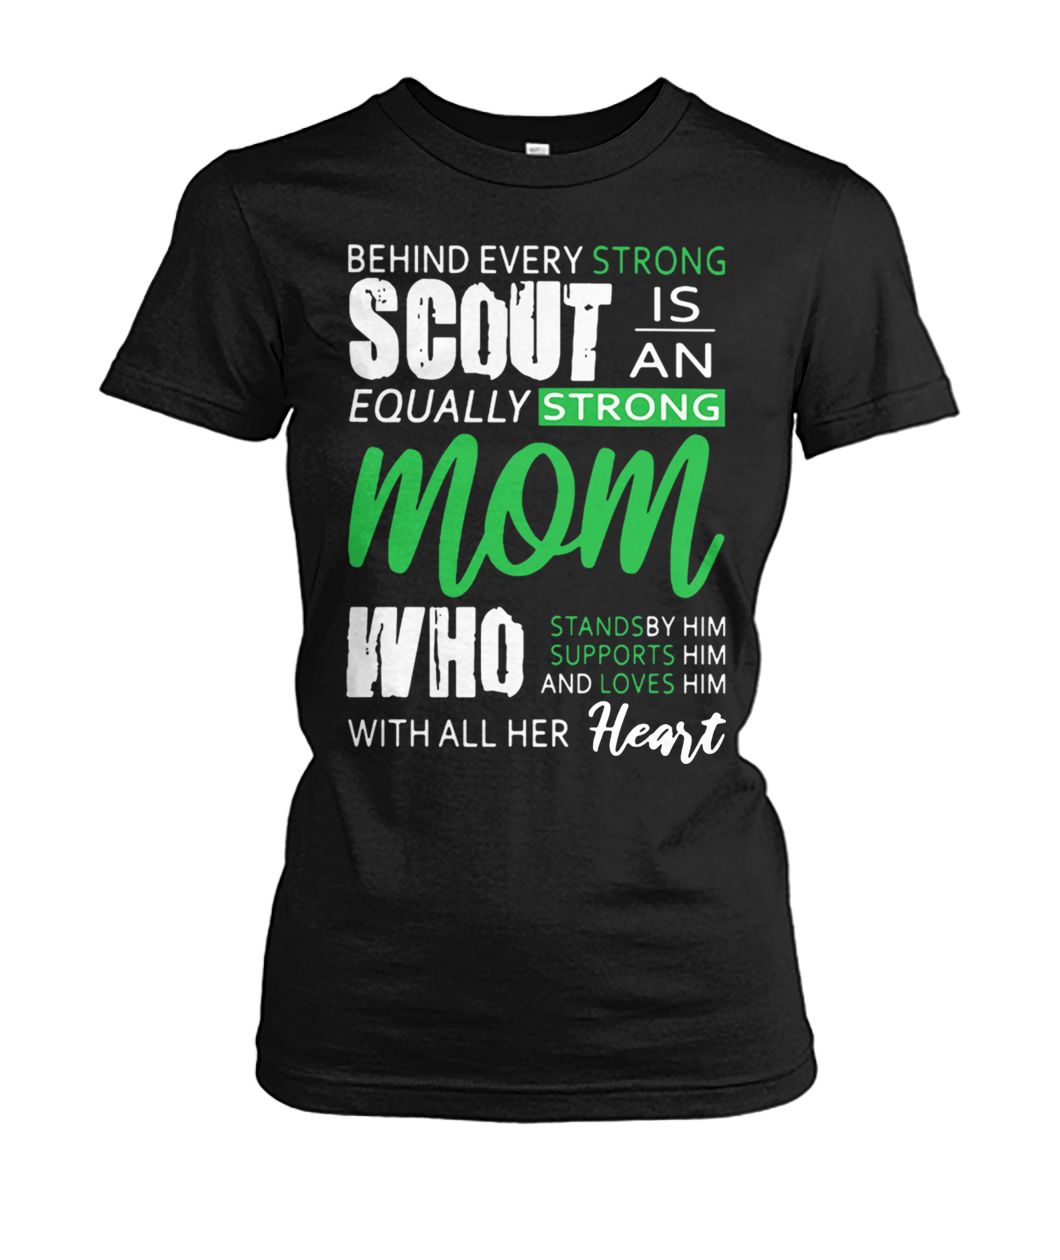 Behind every strong scout is an equally strong mom women's crew tee